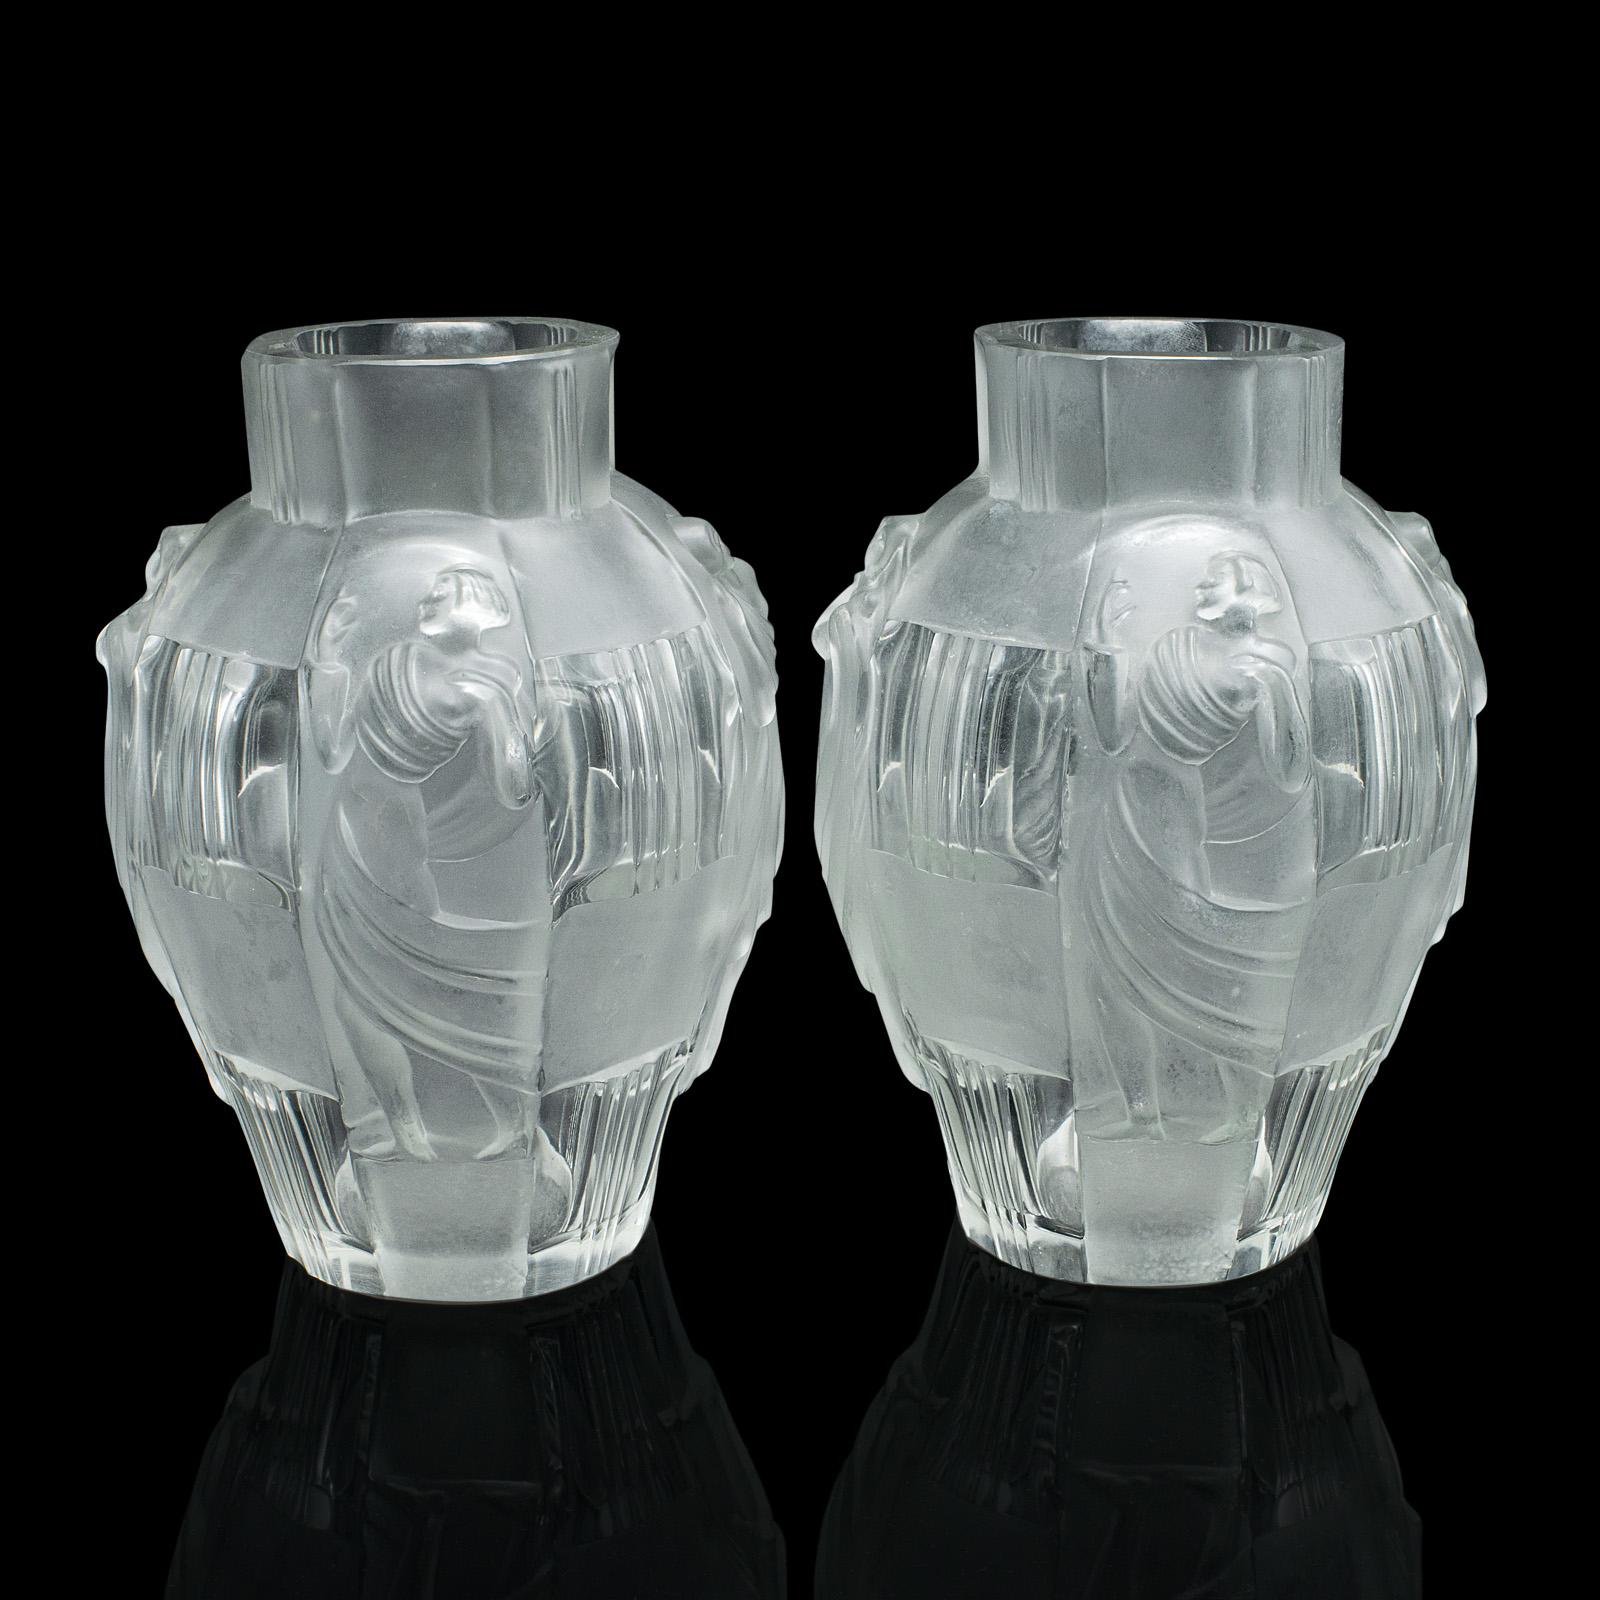 This is a pair of antique Art Nouveau flower vases. A French, frosted glass decorative urn in the manner of Lalique, dating to the early 20th century, circa 1920.

Wonderfully evocative vases with an attractive appearance
Displaying a desirable aged